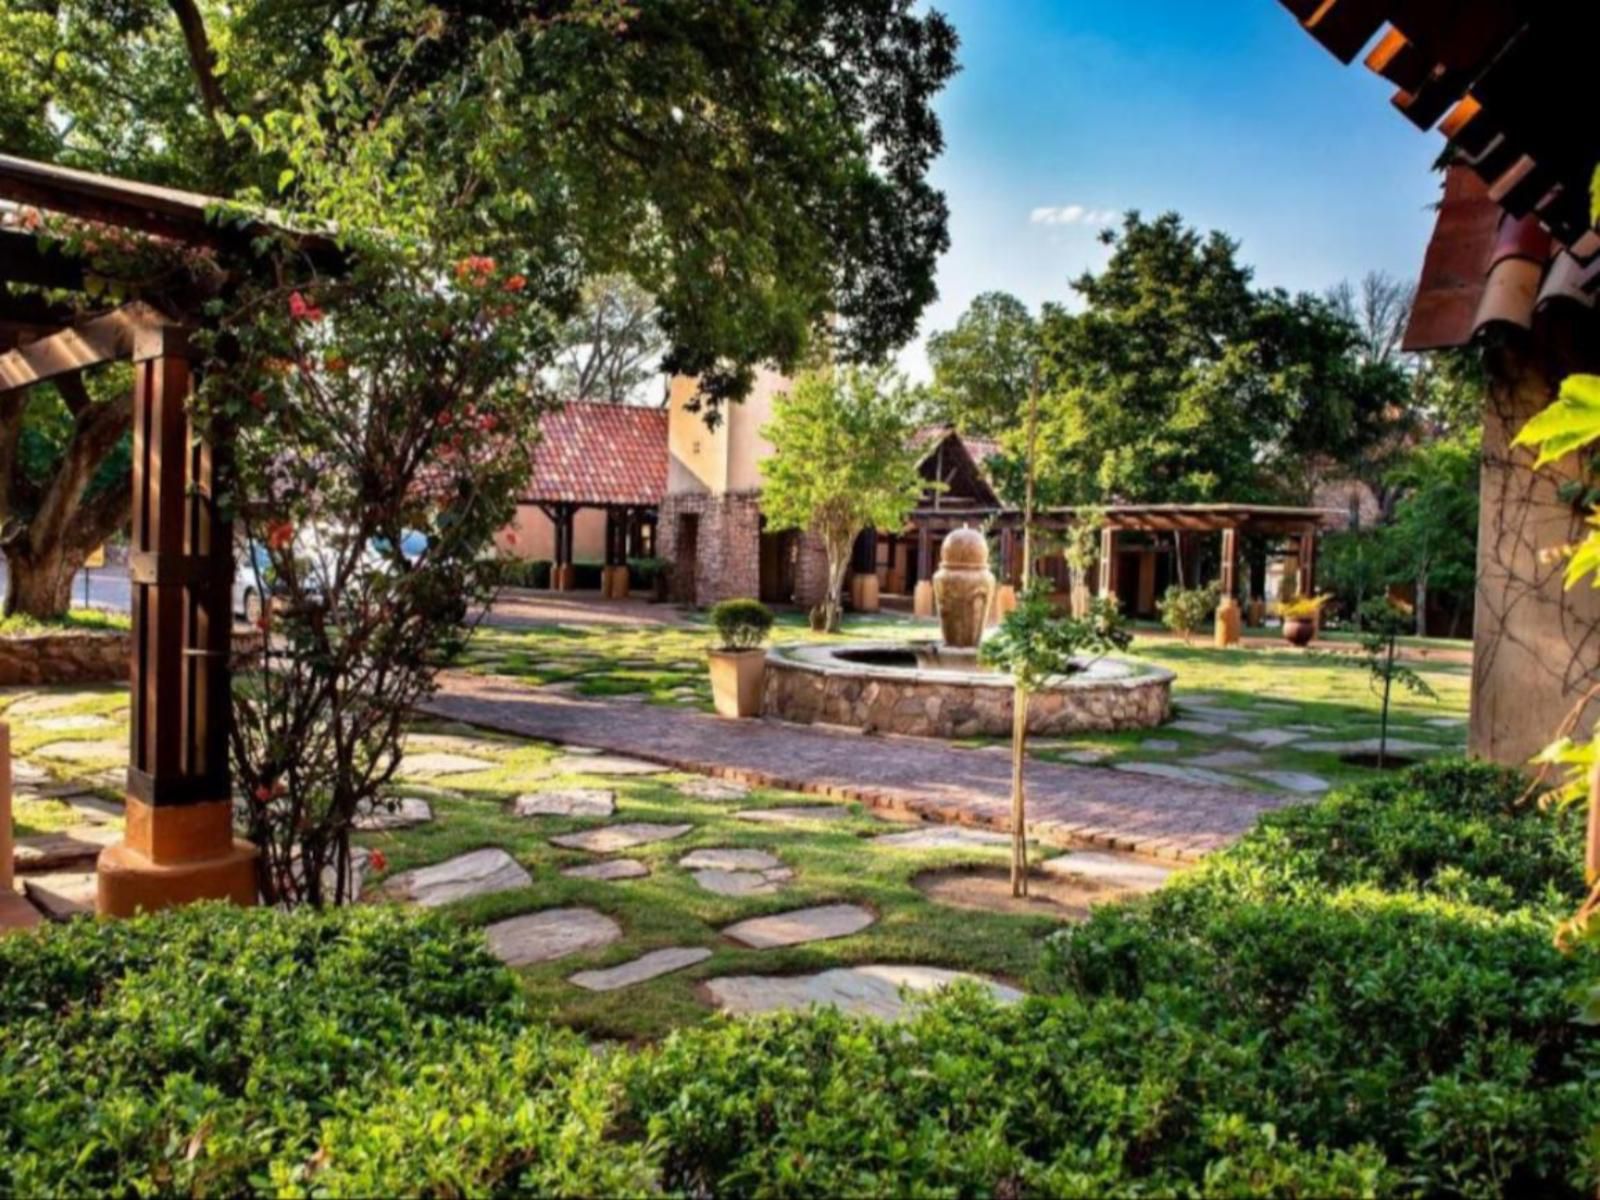 Lombardy Boutique Hotel Lynnwood Pretoria Tshwane Gauteng South Africa House, Building, Architecture, Garden, Nature, Plant